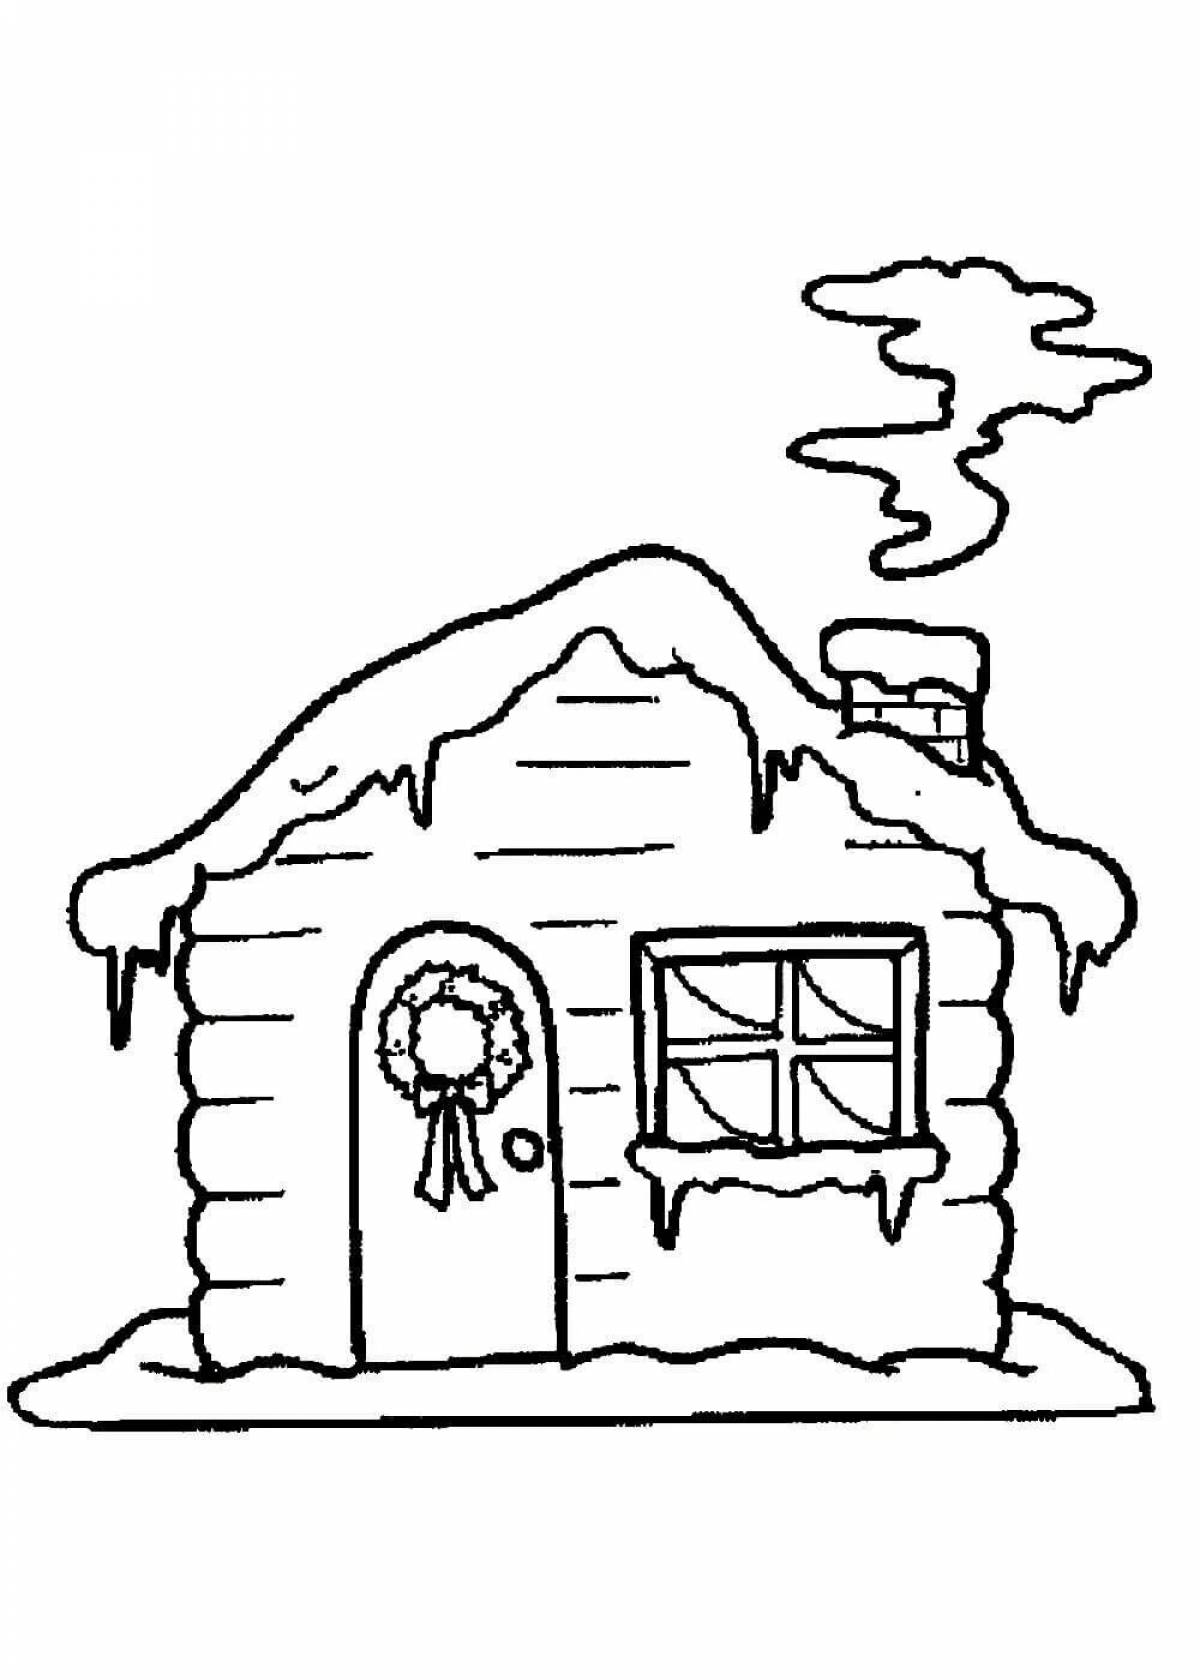 Playtime hut coloring book for kids